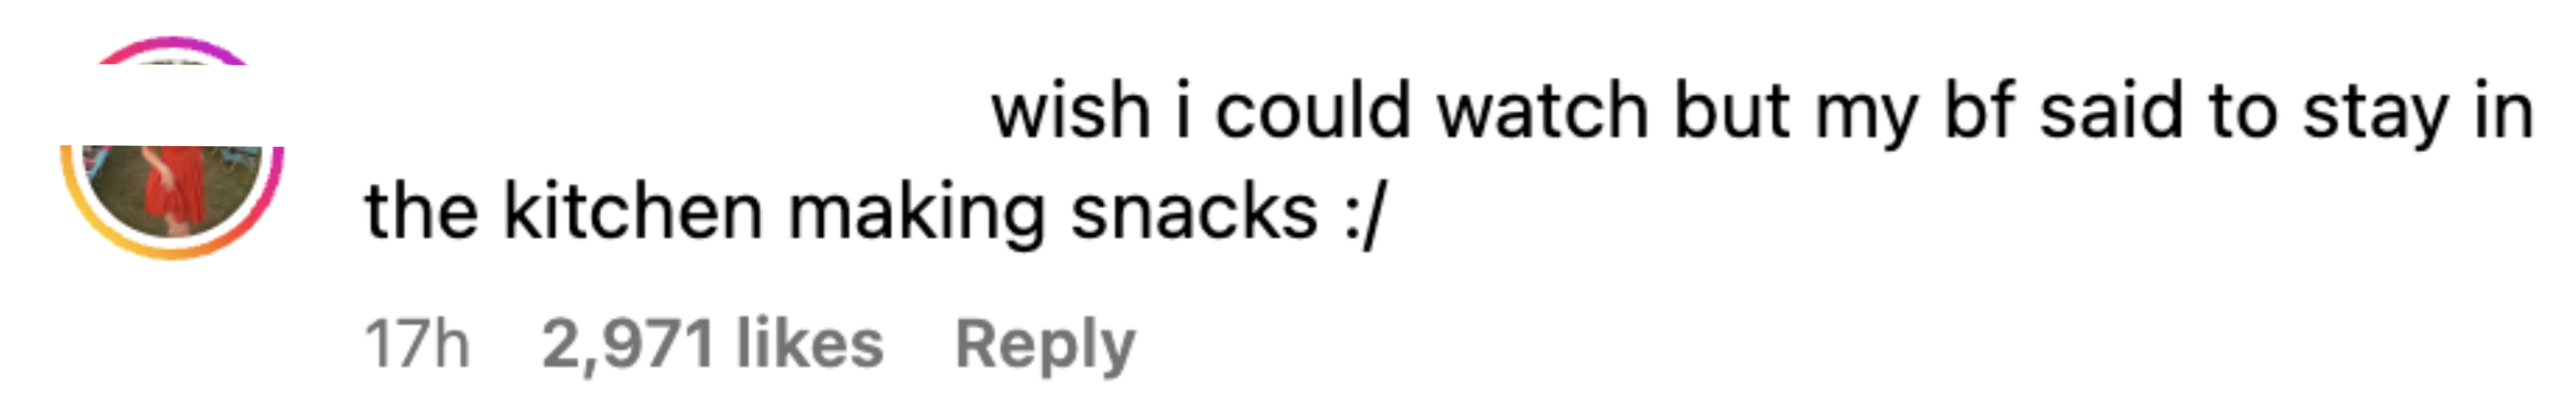 &quot;wish i could watch but my bf said to stay in the kitchen making snacks :/&quot; with 2,971 likes